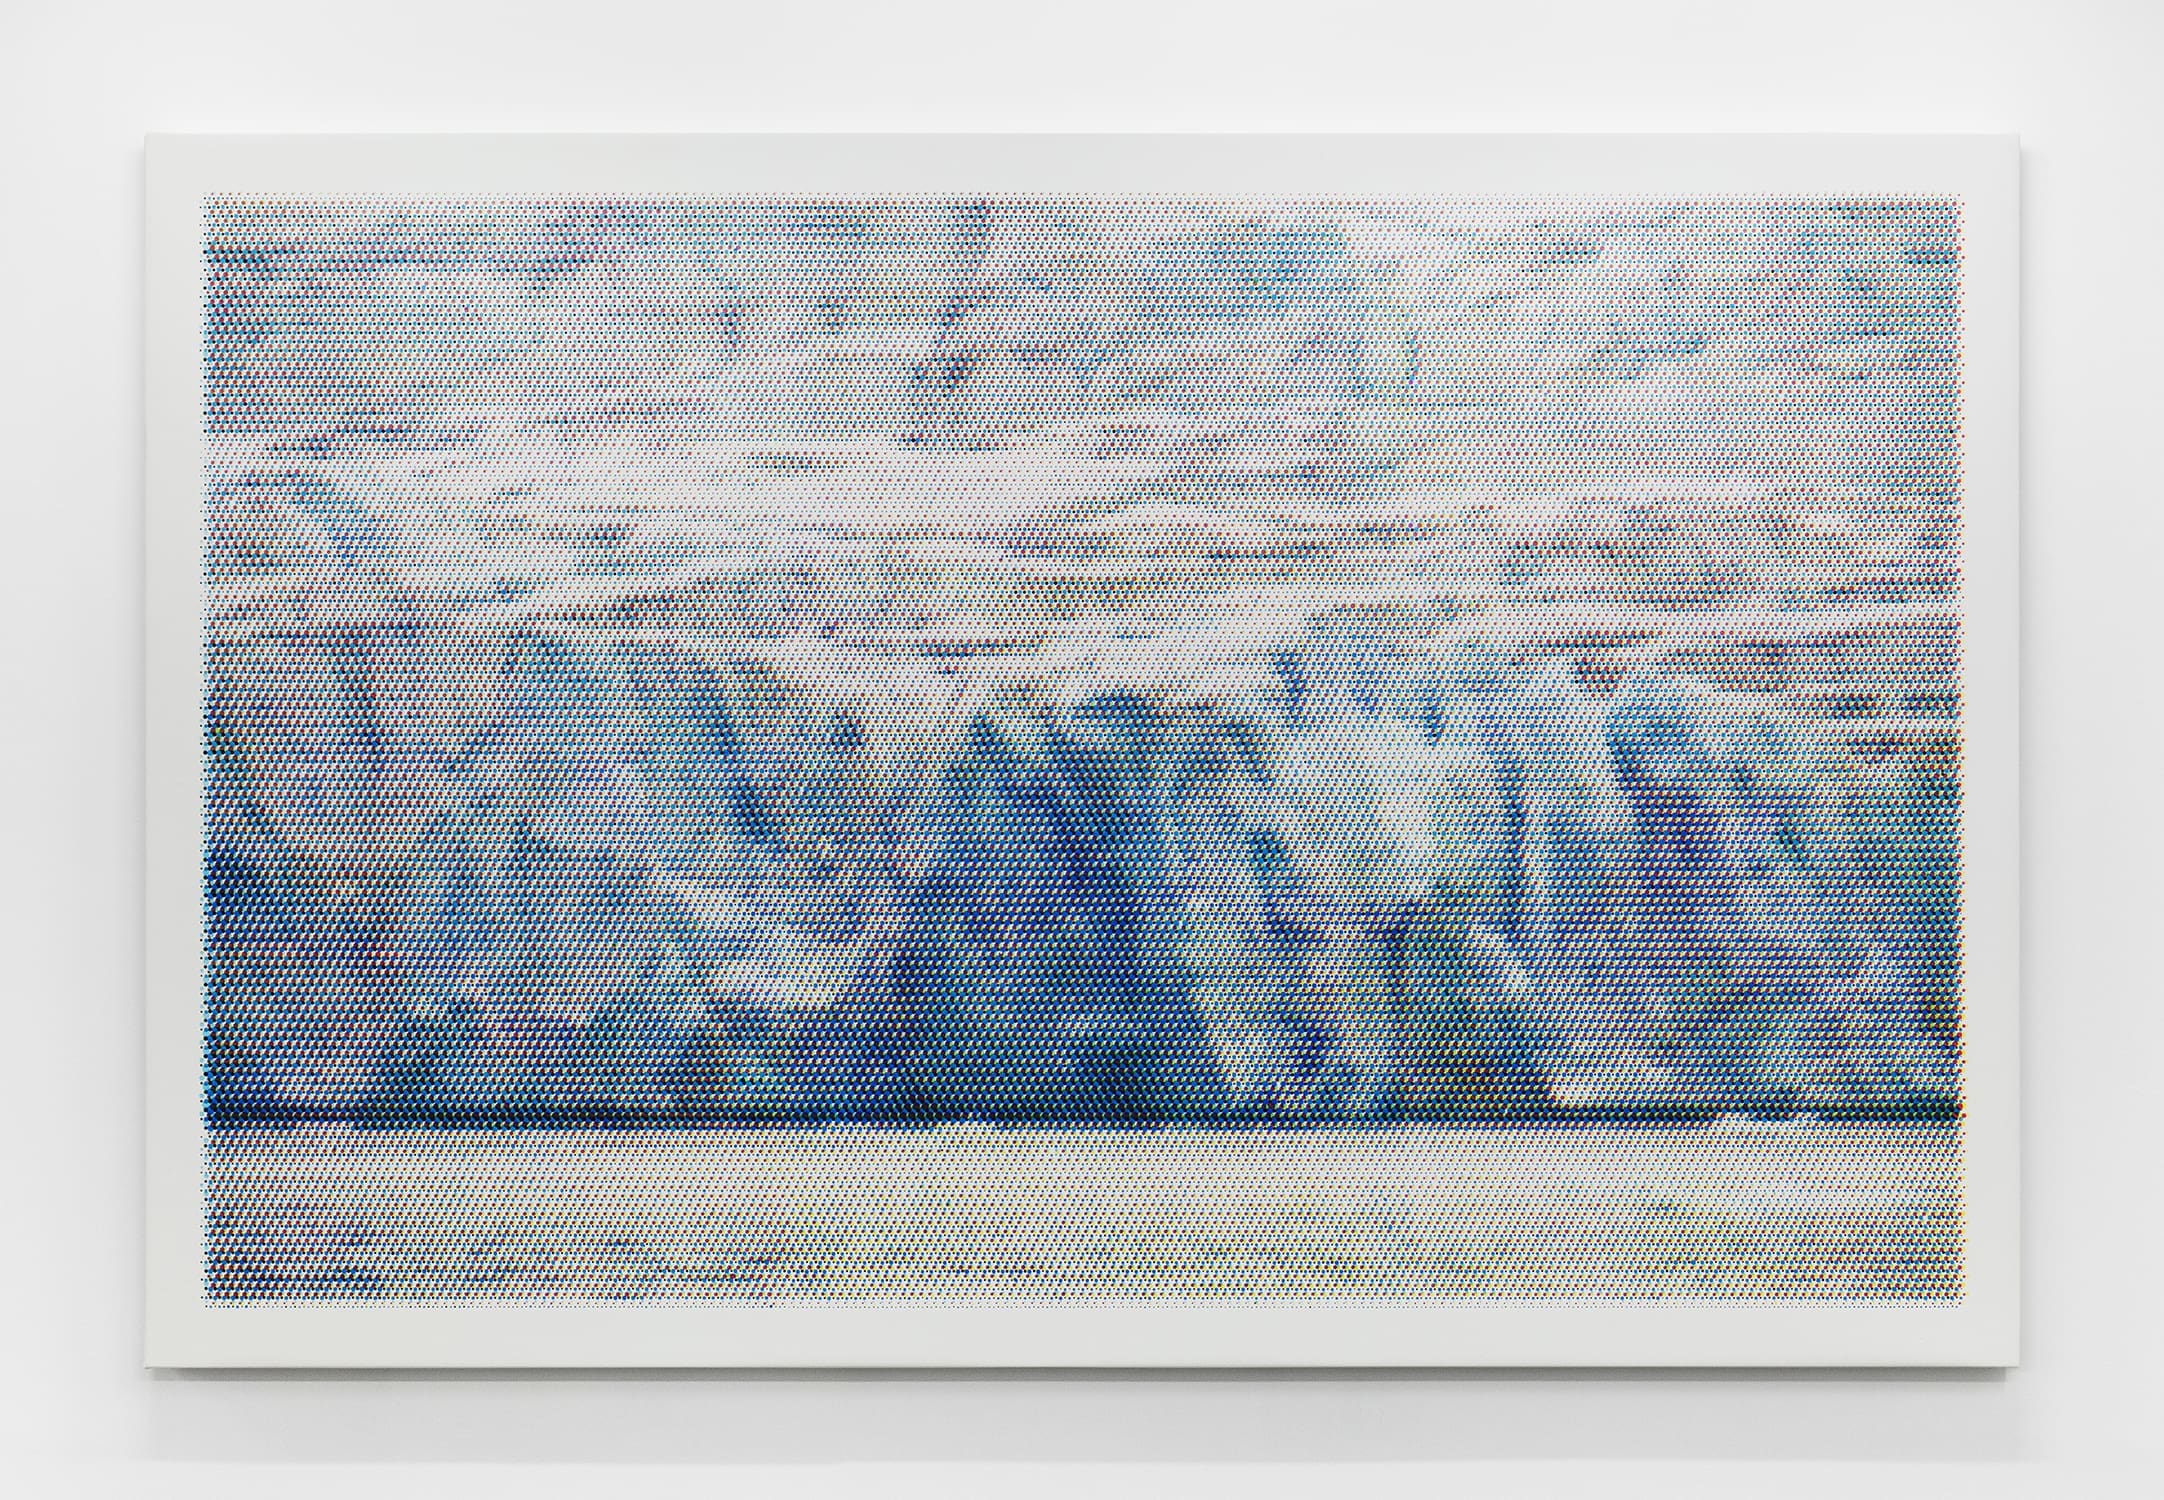 Anne-Karin Furunes Calving Glacier XI, Borebreen, Svalbard, 2023 Acrylic on canvas, perforated 78 3/4 x 120 1/8 inches (200 x 305 cm)